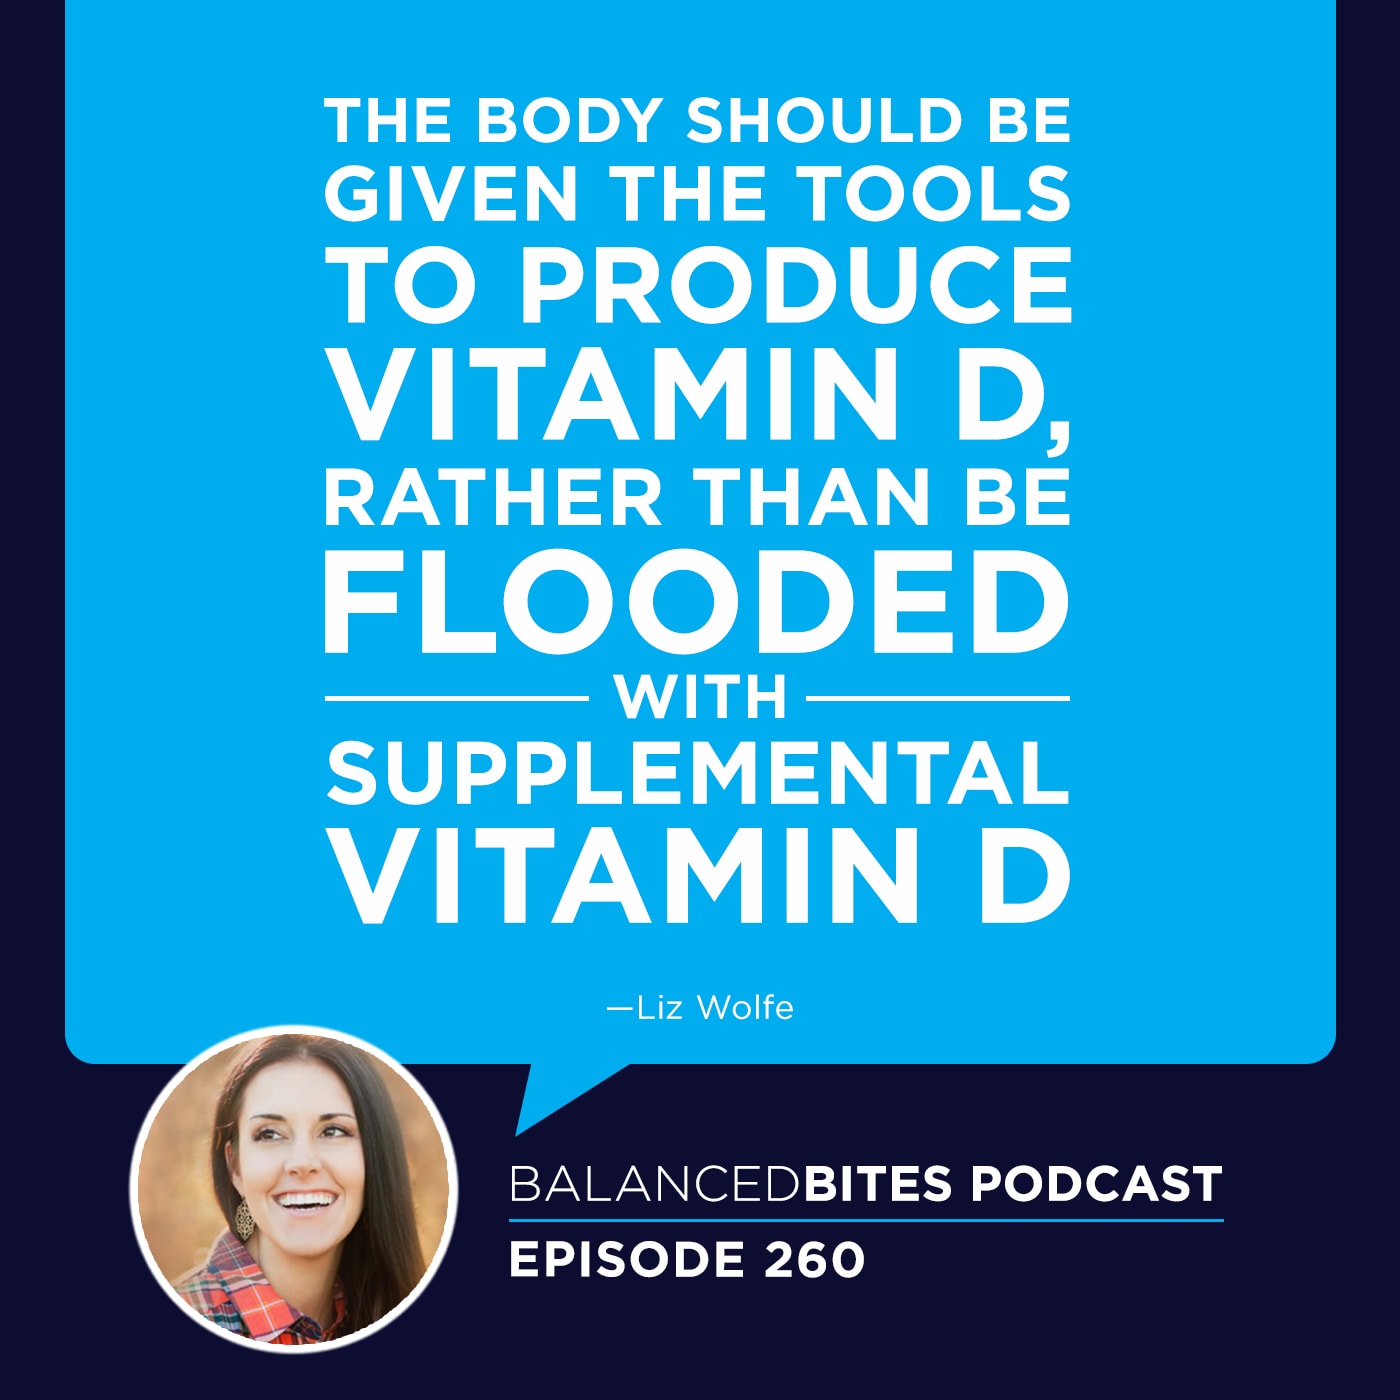 aleo Period Care, Sun Protection, Eating On-The-Go, Not Eating Red Meat, & Apple Cider Vinegar - Diane Sanfilippo, Liz Wolfe | Balanced Bites